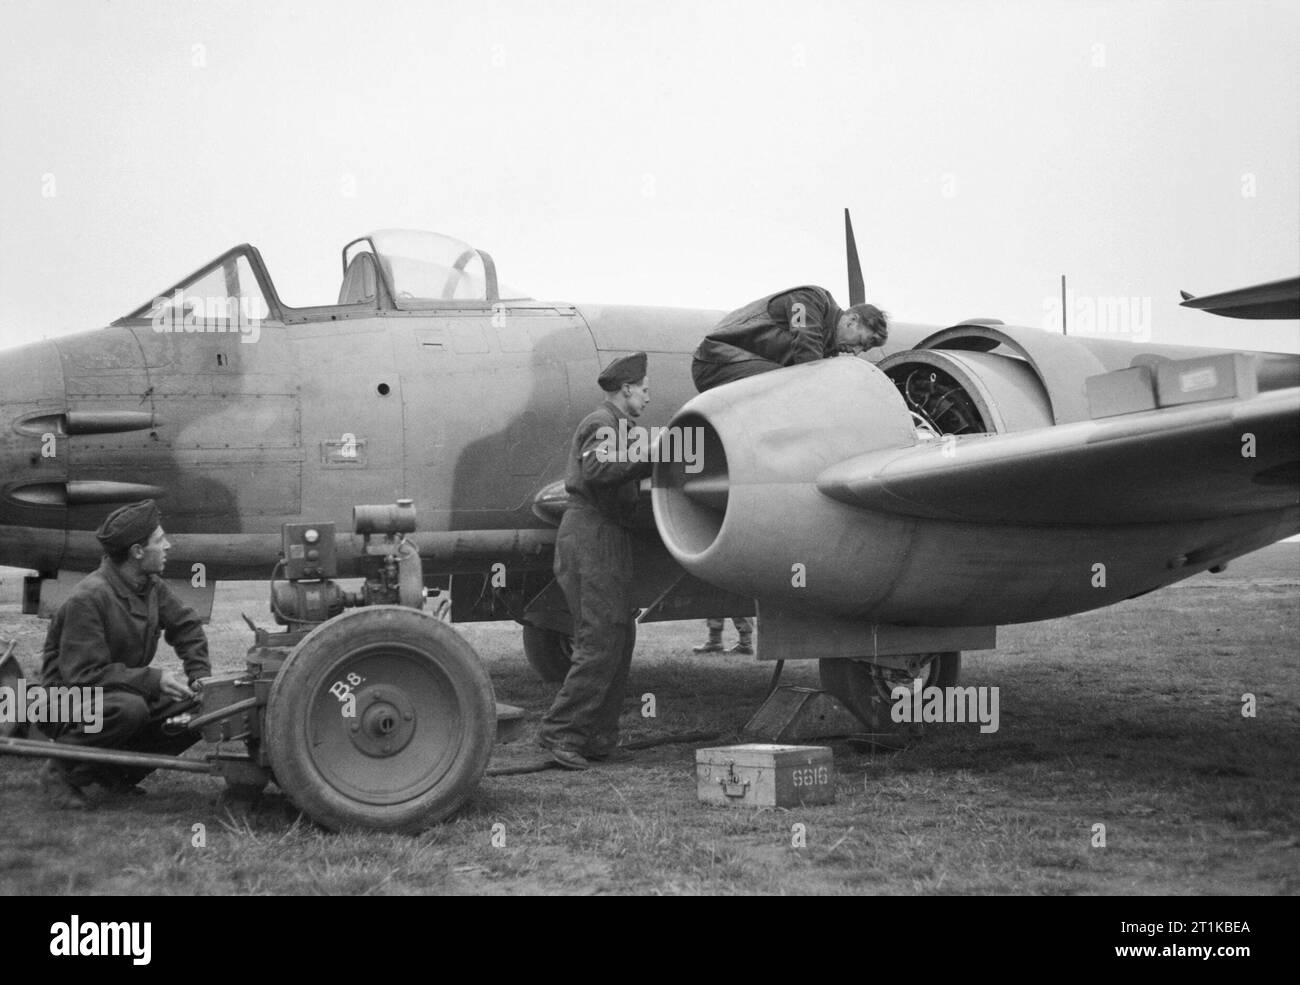 Royal Air Force- 2nd Tactical Air Force, 1943-1945. Engine fitters at work on the Rolls-Royce Derwent jet-engine of a Gloster Meteor F Mark III of No. 616 Squadron RAF at B156/Luneberg, Germany. Stock Photo